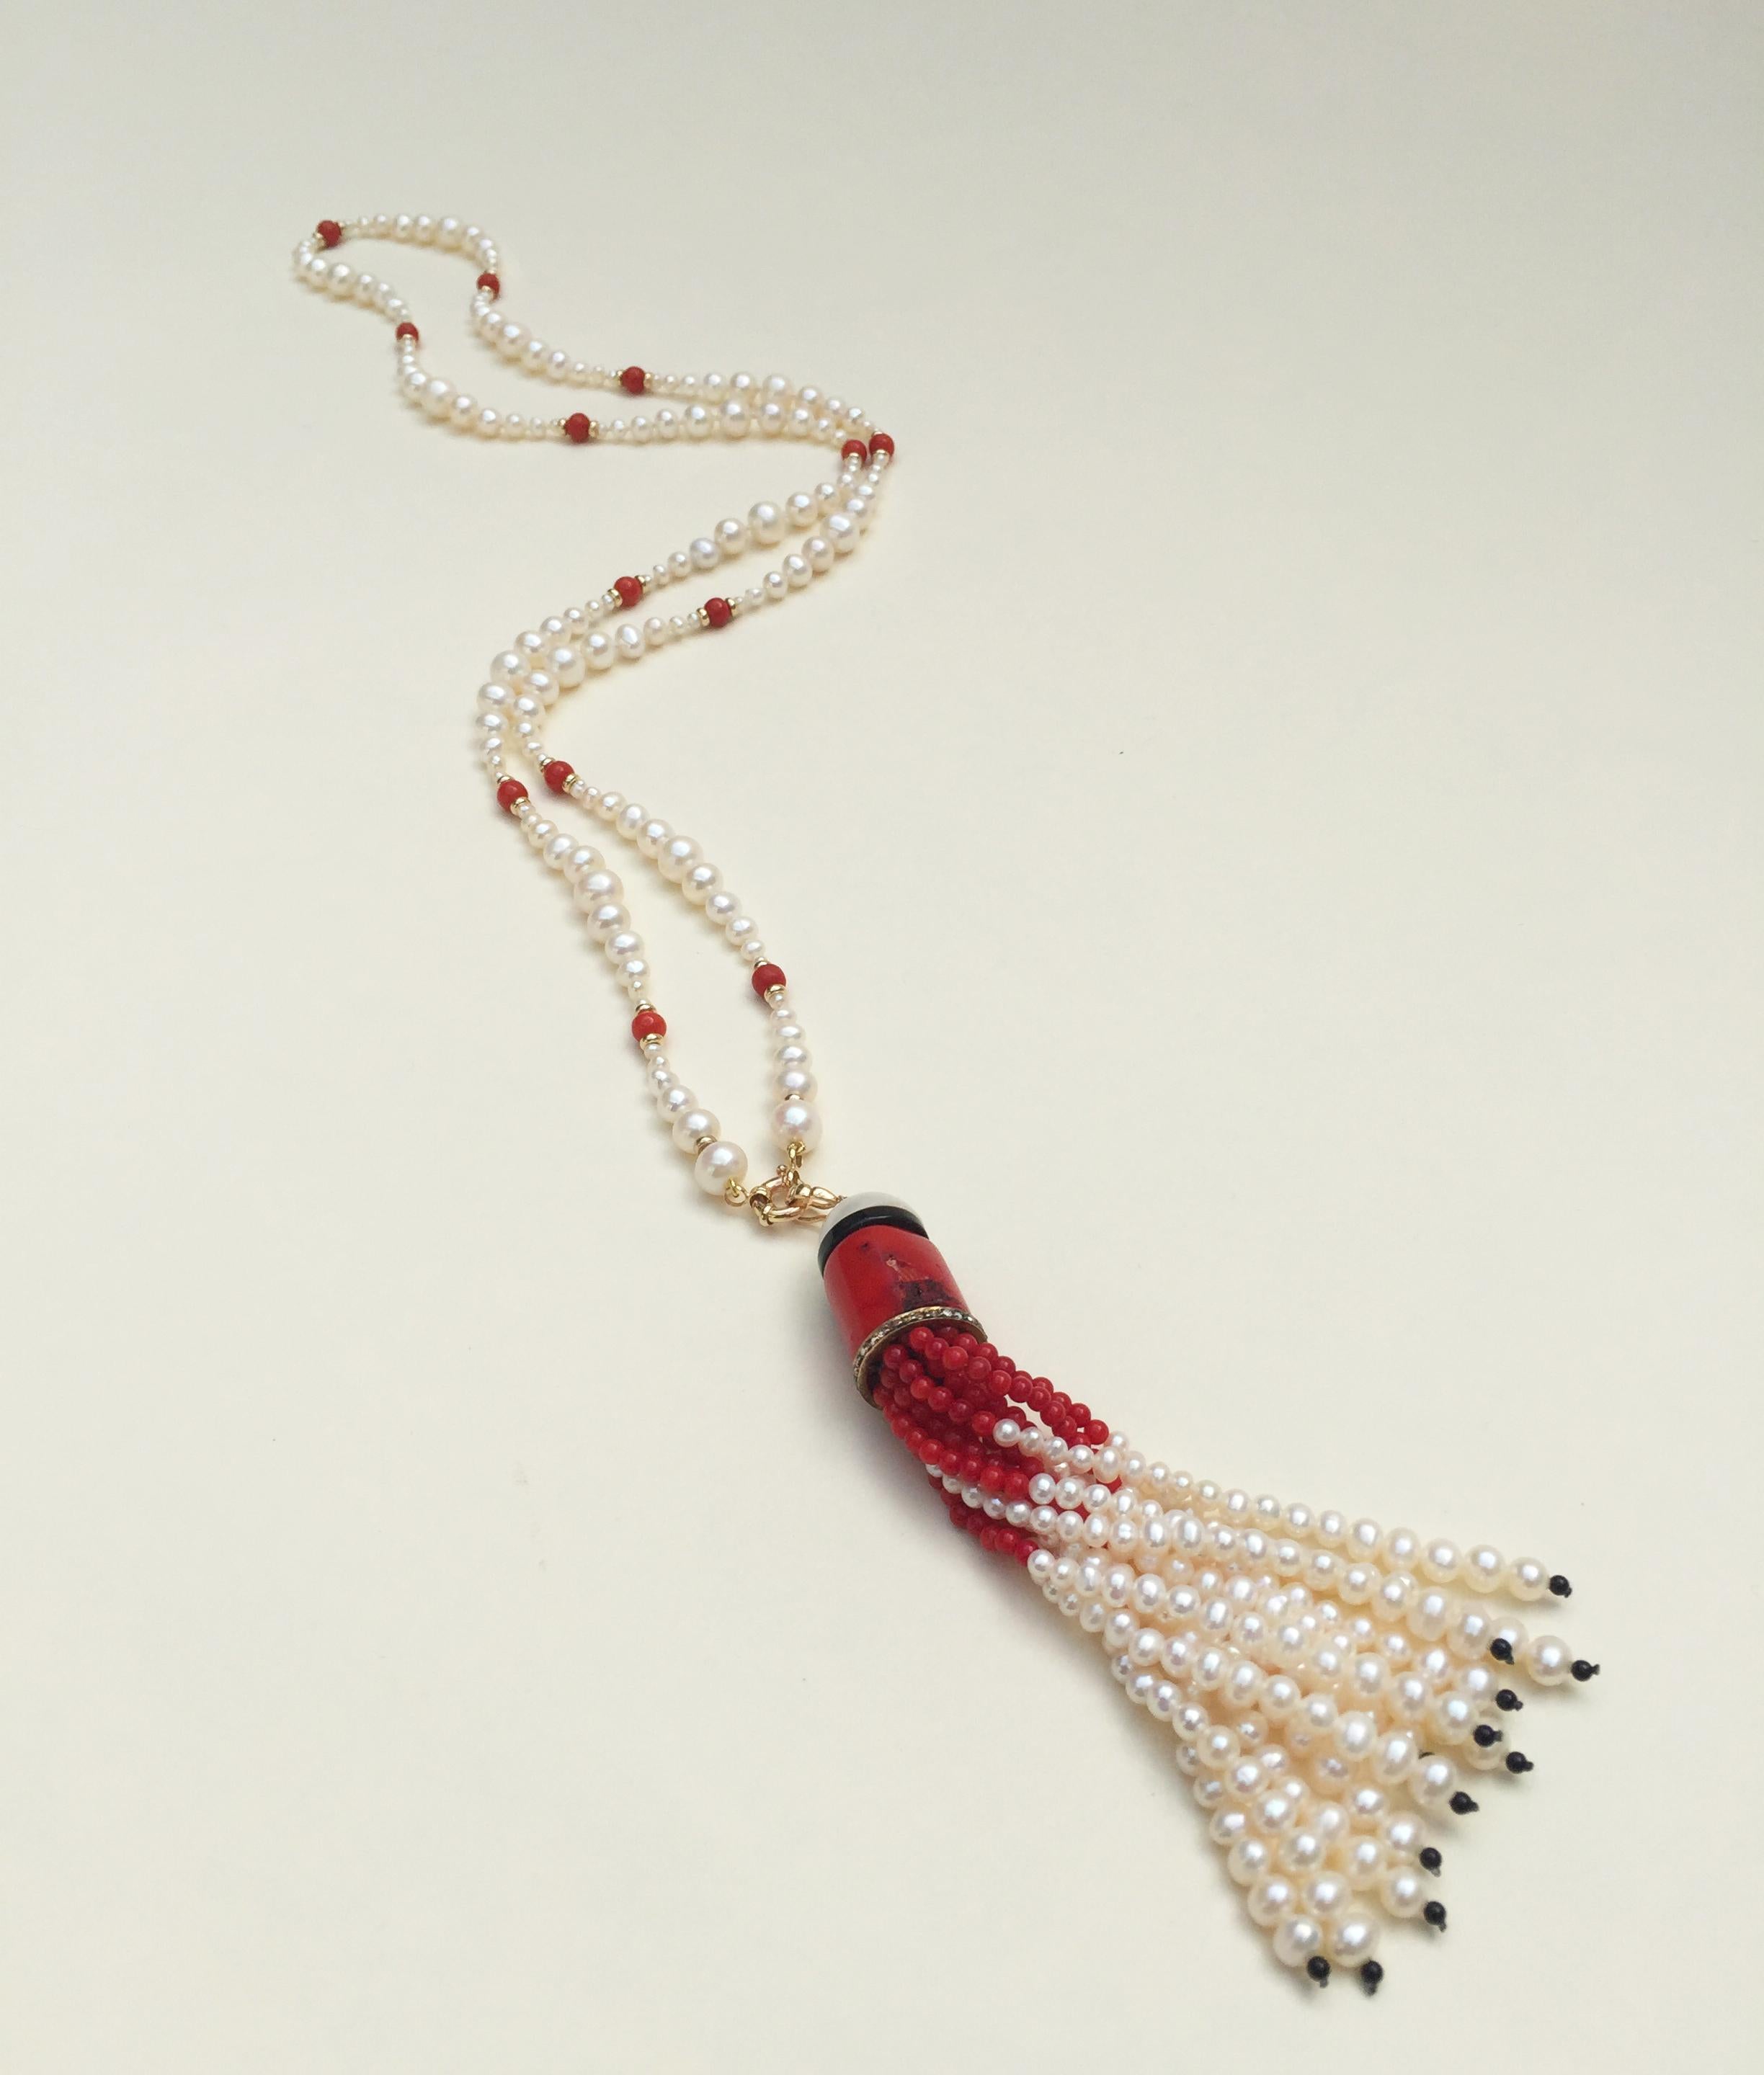 This graduated white pearl and coral necklace with tassel and 14k yellow gold clasp is beautiful with bright red coral and glowing white pearls. The necklace is handcrafted by Marina J. with her exclusive multiple graduated pearl design with round